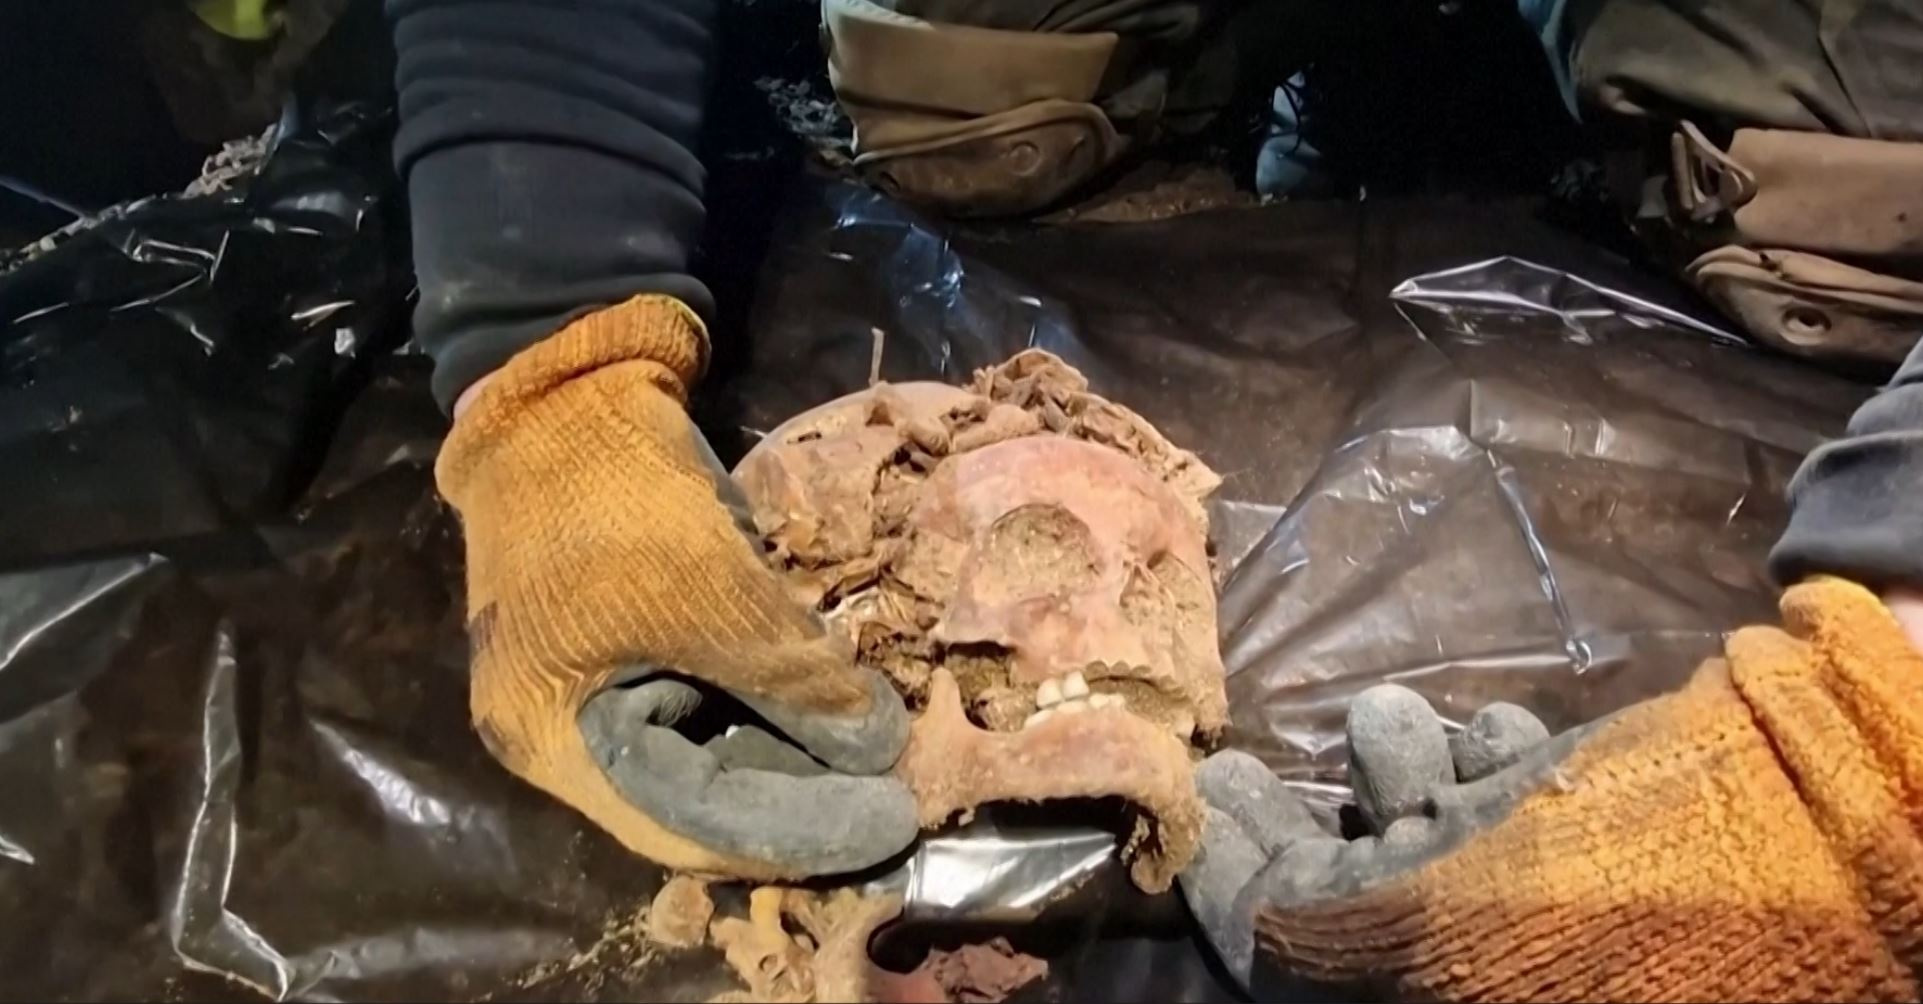 Skeletons missing hands and feet found in Hitler's Wolf's Lair